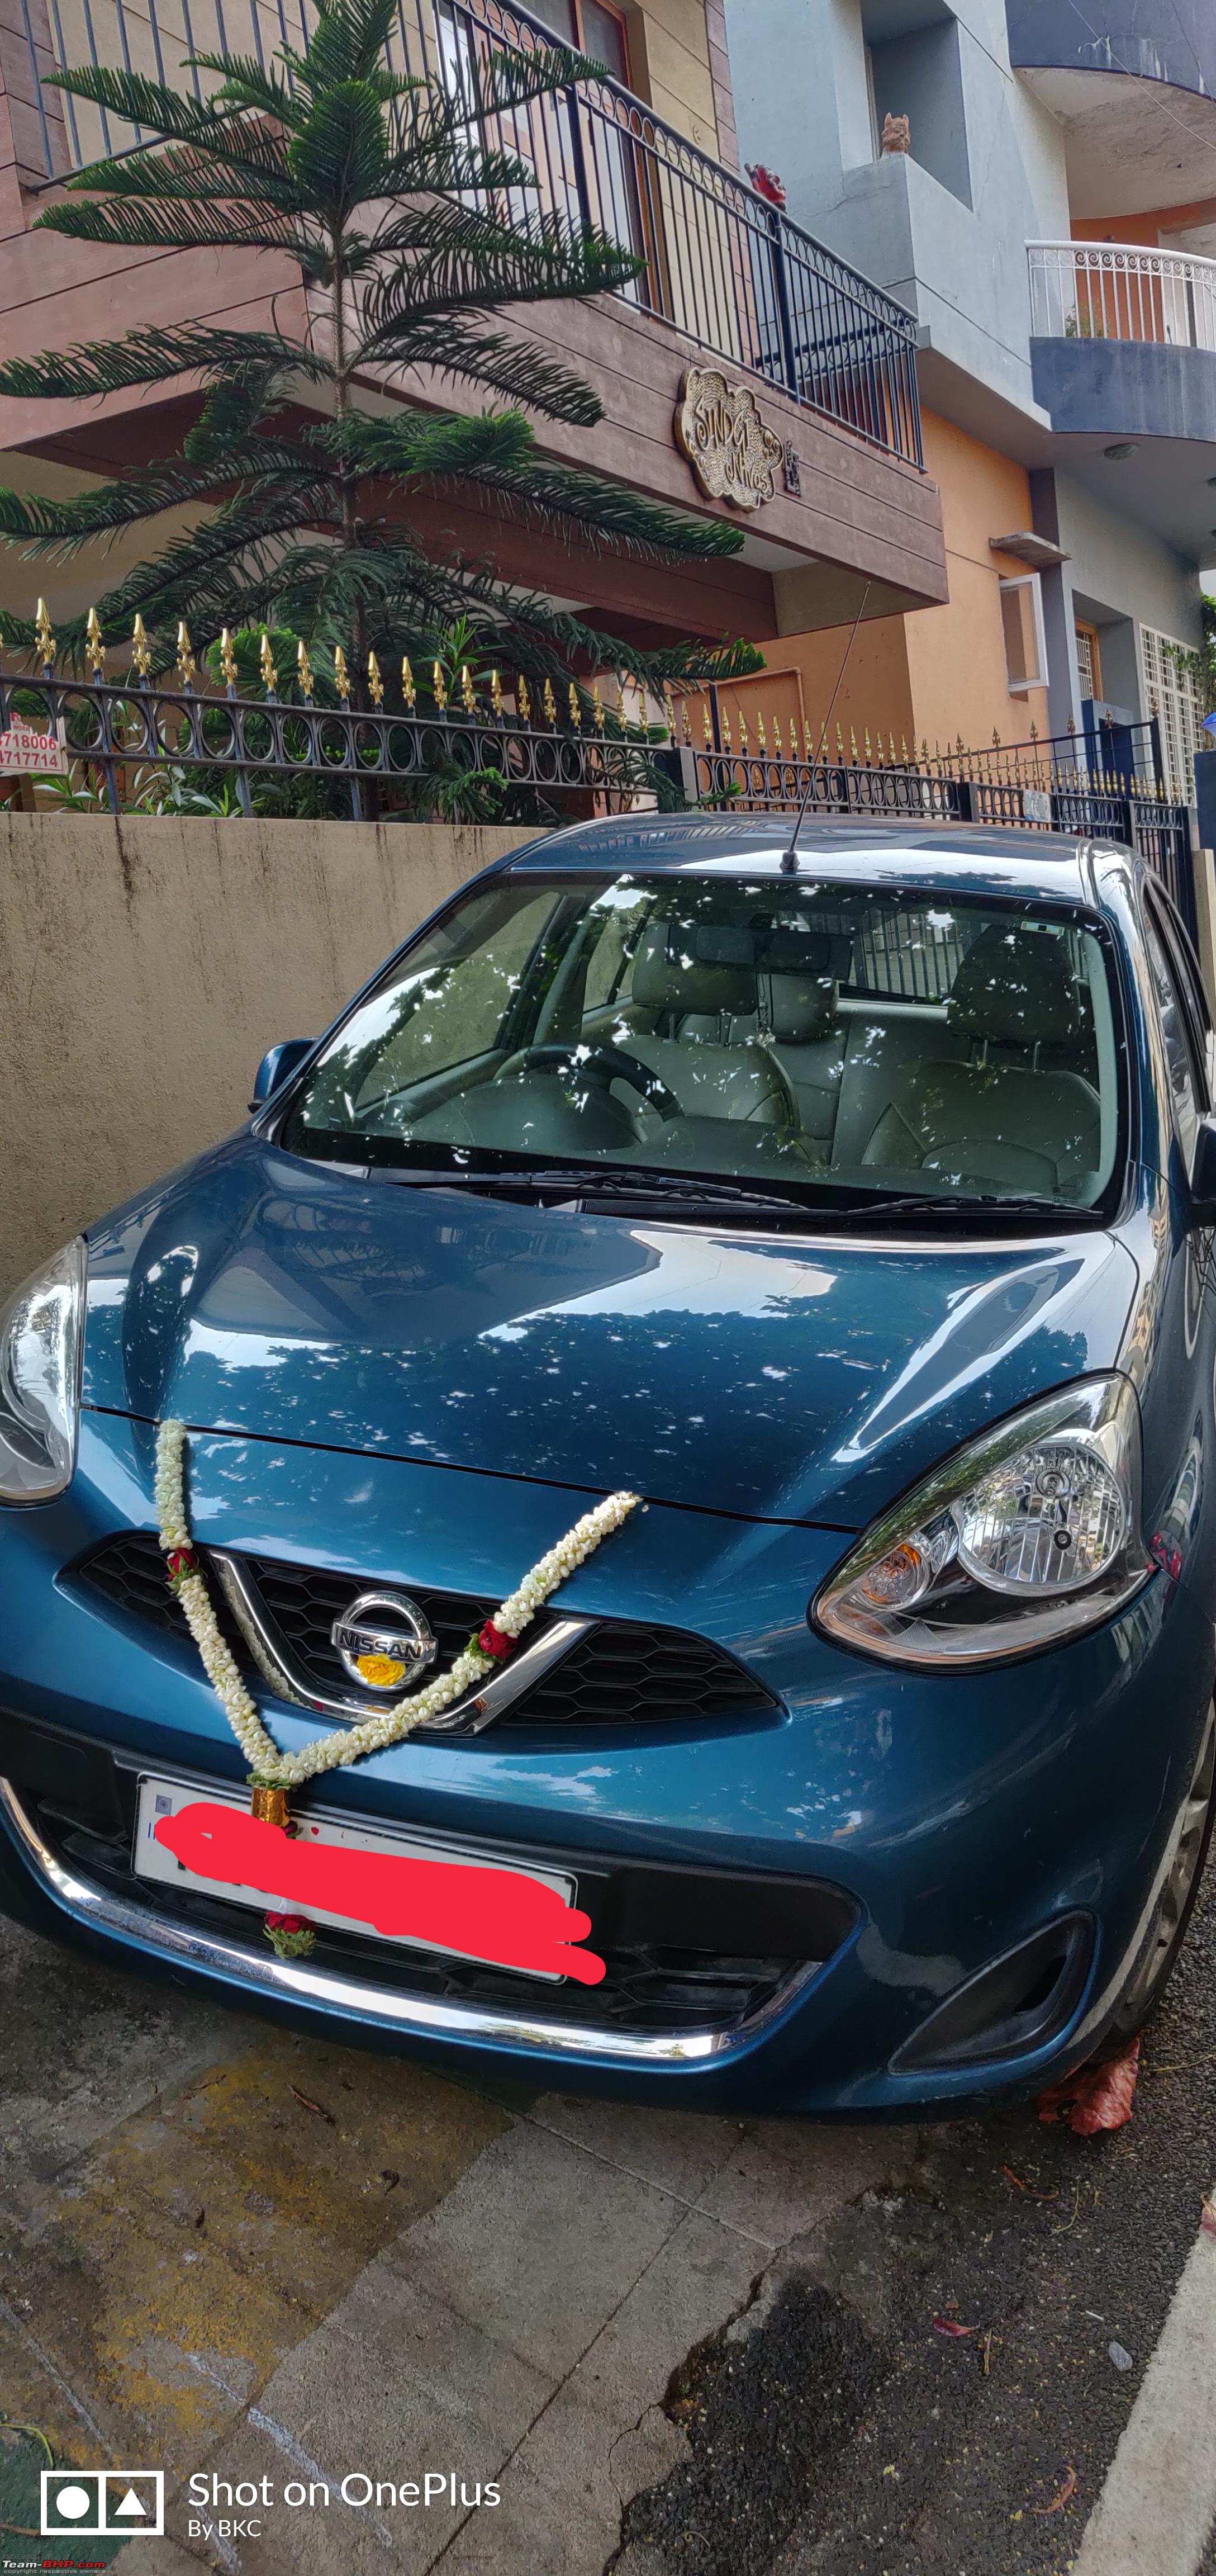 Planning to Buy A Used Nissan Micra? Here Are Some Pros And Cons